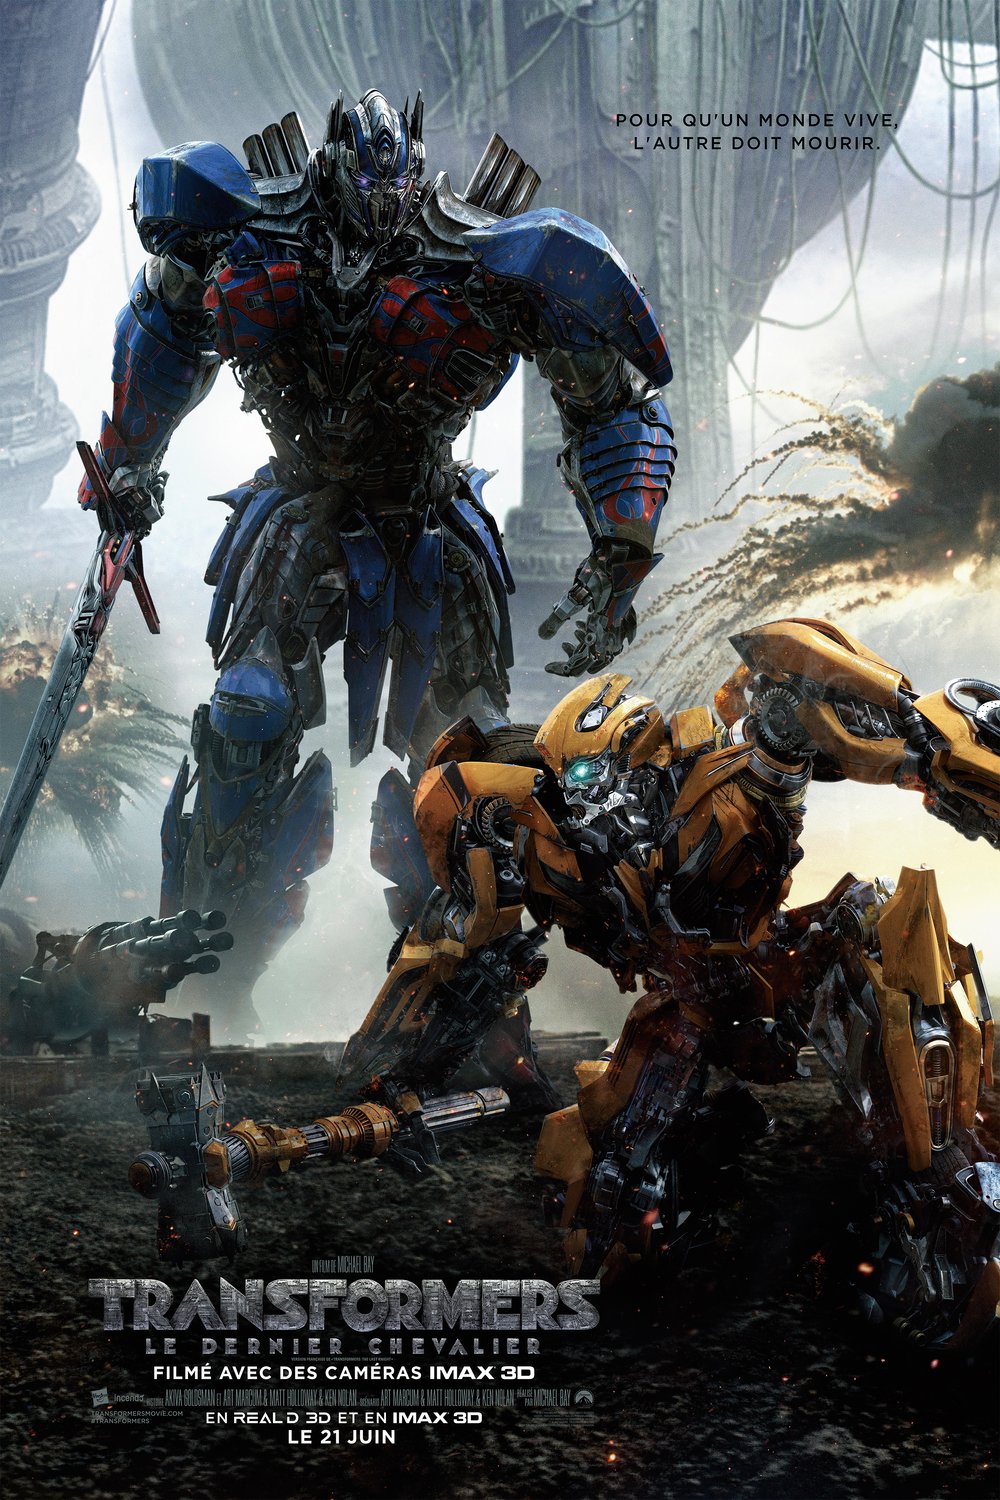 Poster of the movie Transformers: Le dernier chevalier